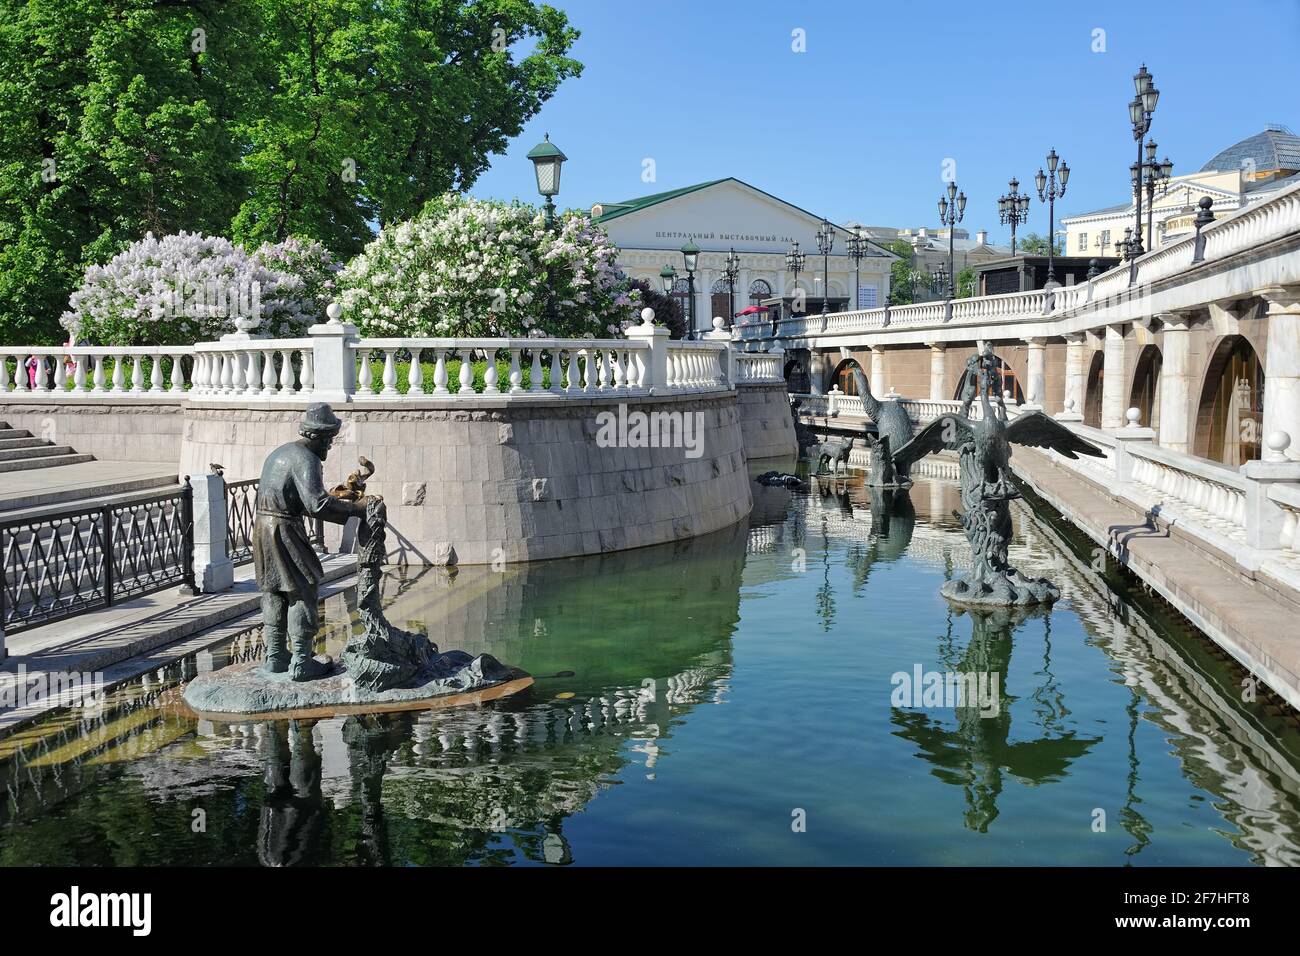 = Sculptures of Folk Tales in the Neglinnaya River Fountain Ensemble =  Composition of sculptures from Russian folk tales, Krylov's fables, and other Stock Photo